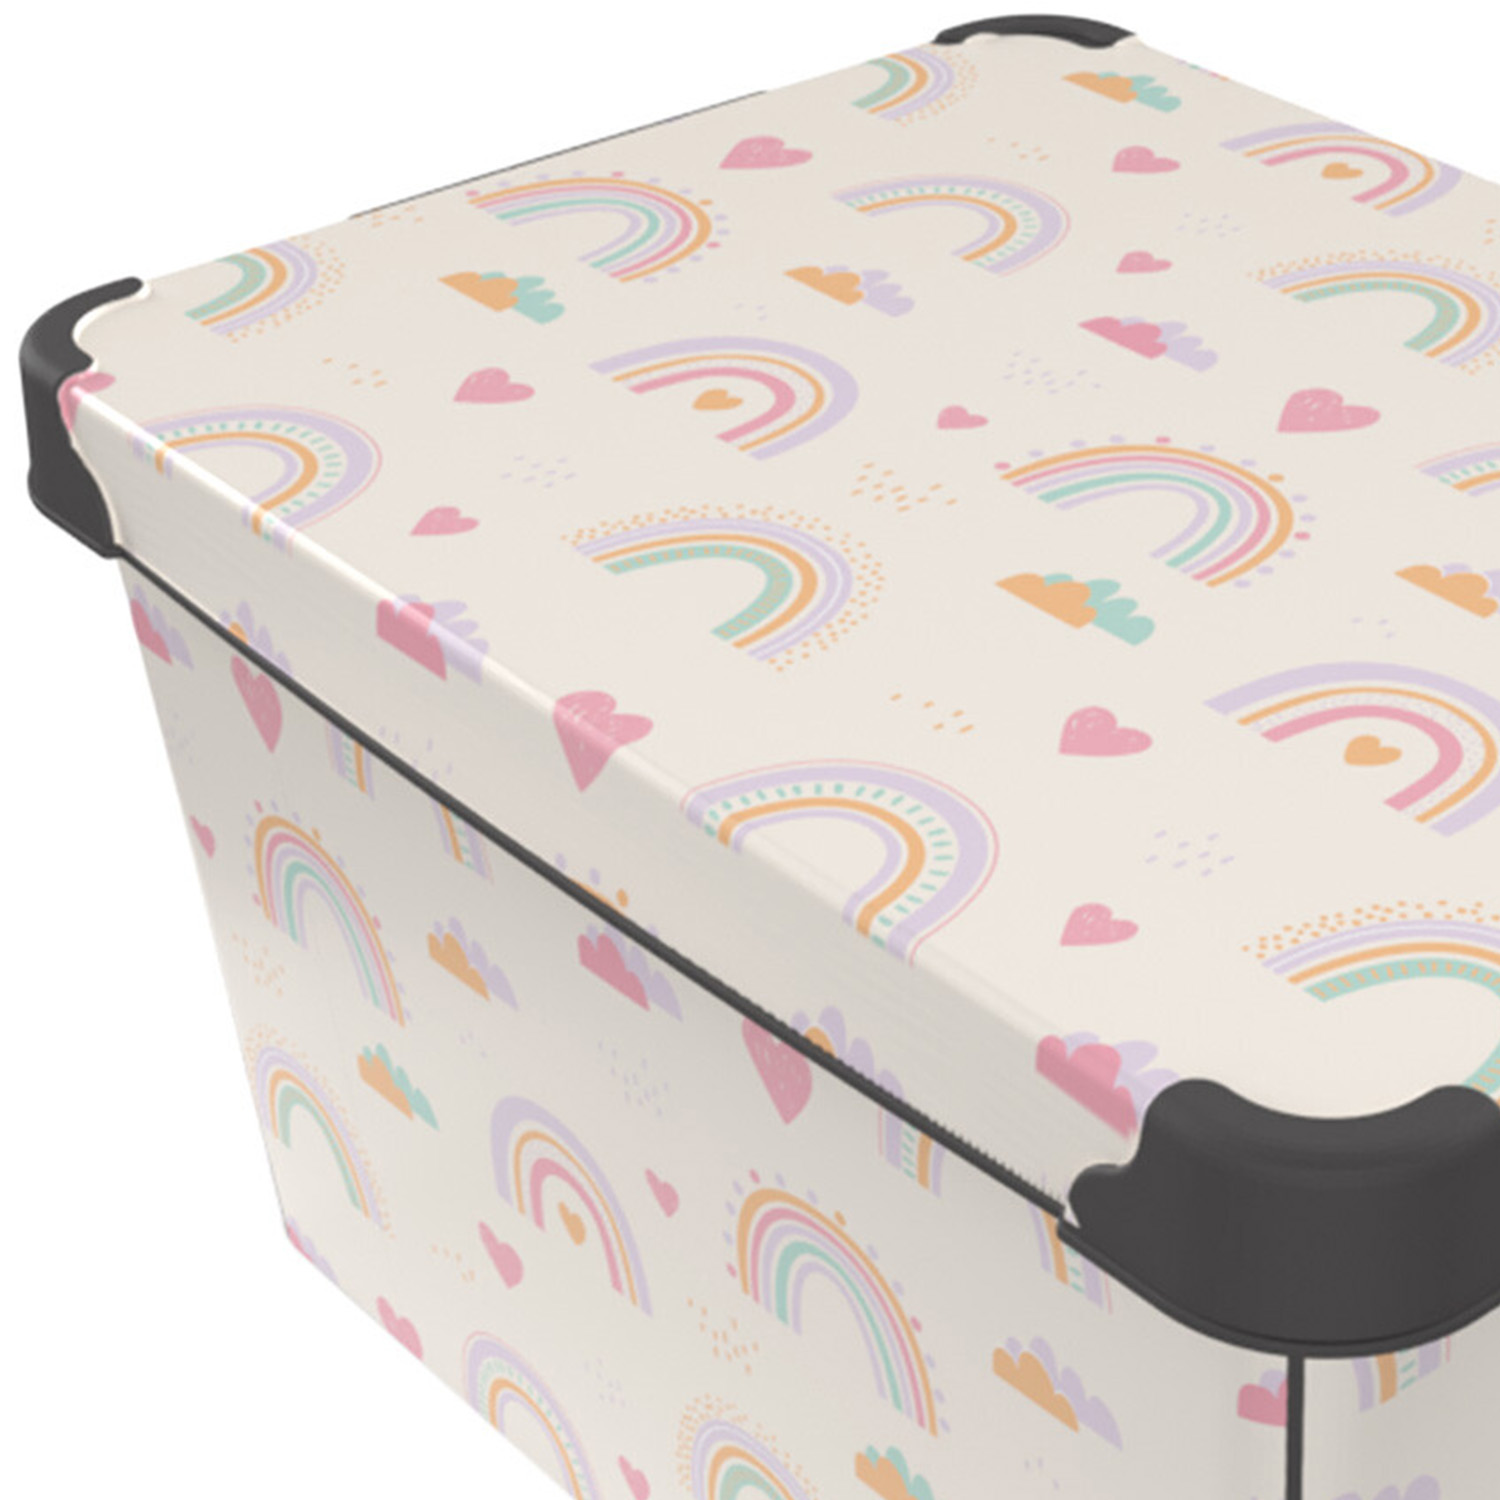 17L Rainbow Patterned Storage Box with Lid Image 4